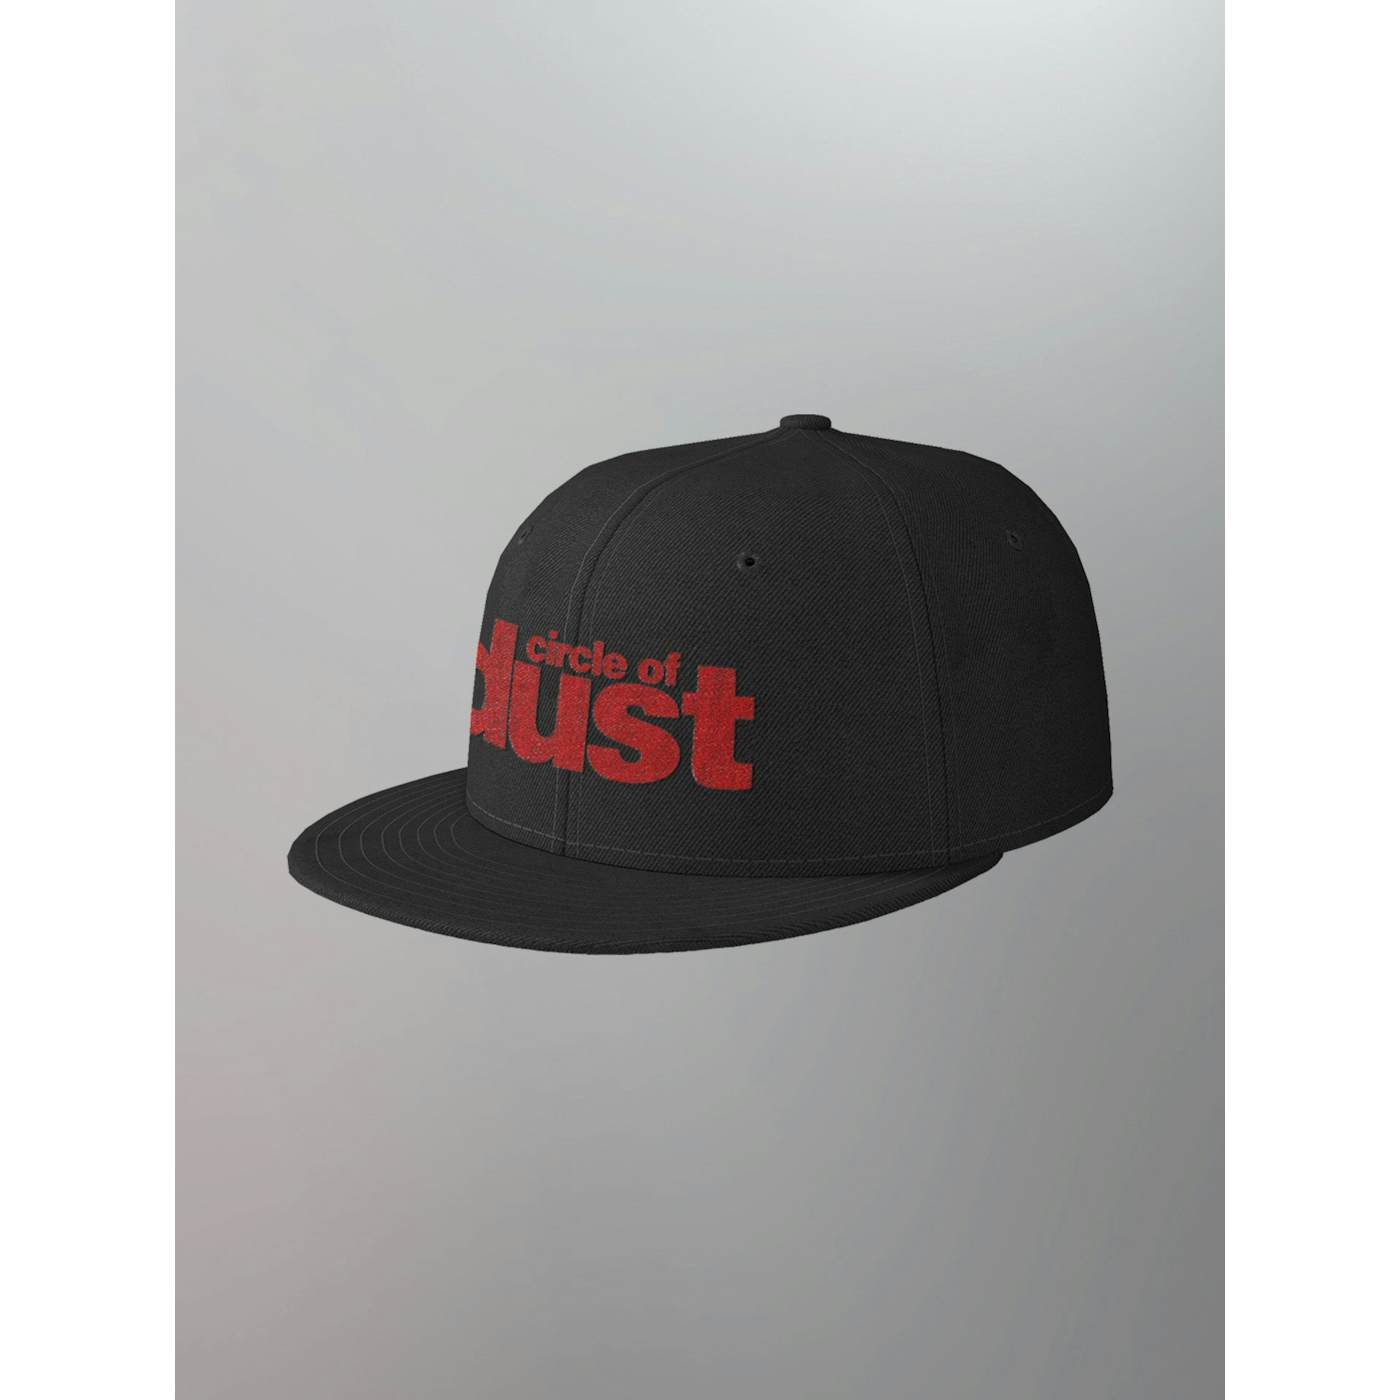 Circle of Dust - Logo Snapback Hat [Red]